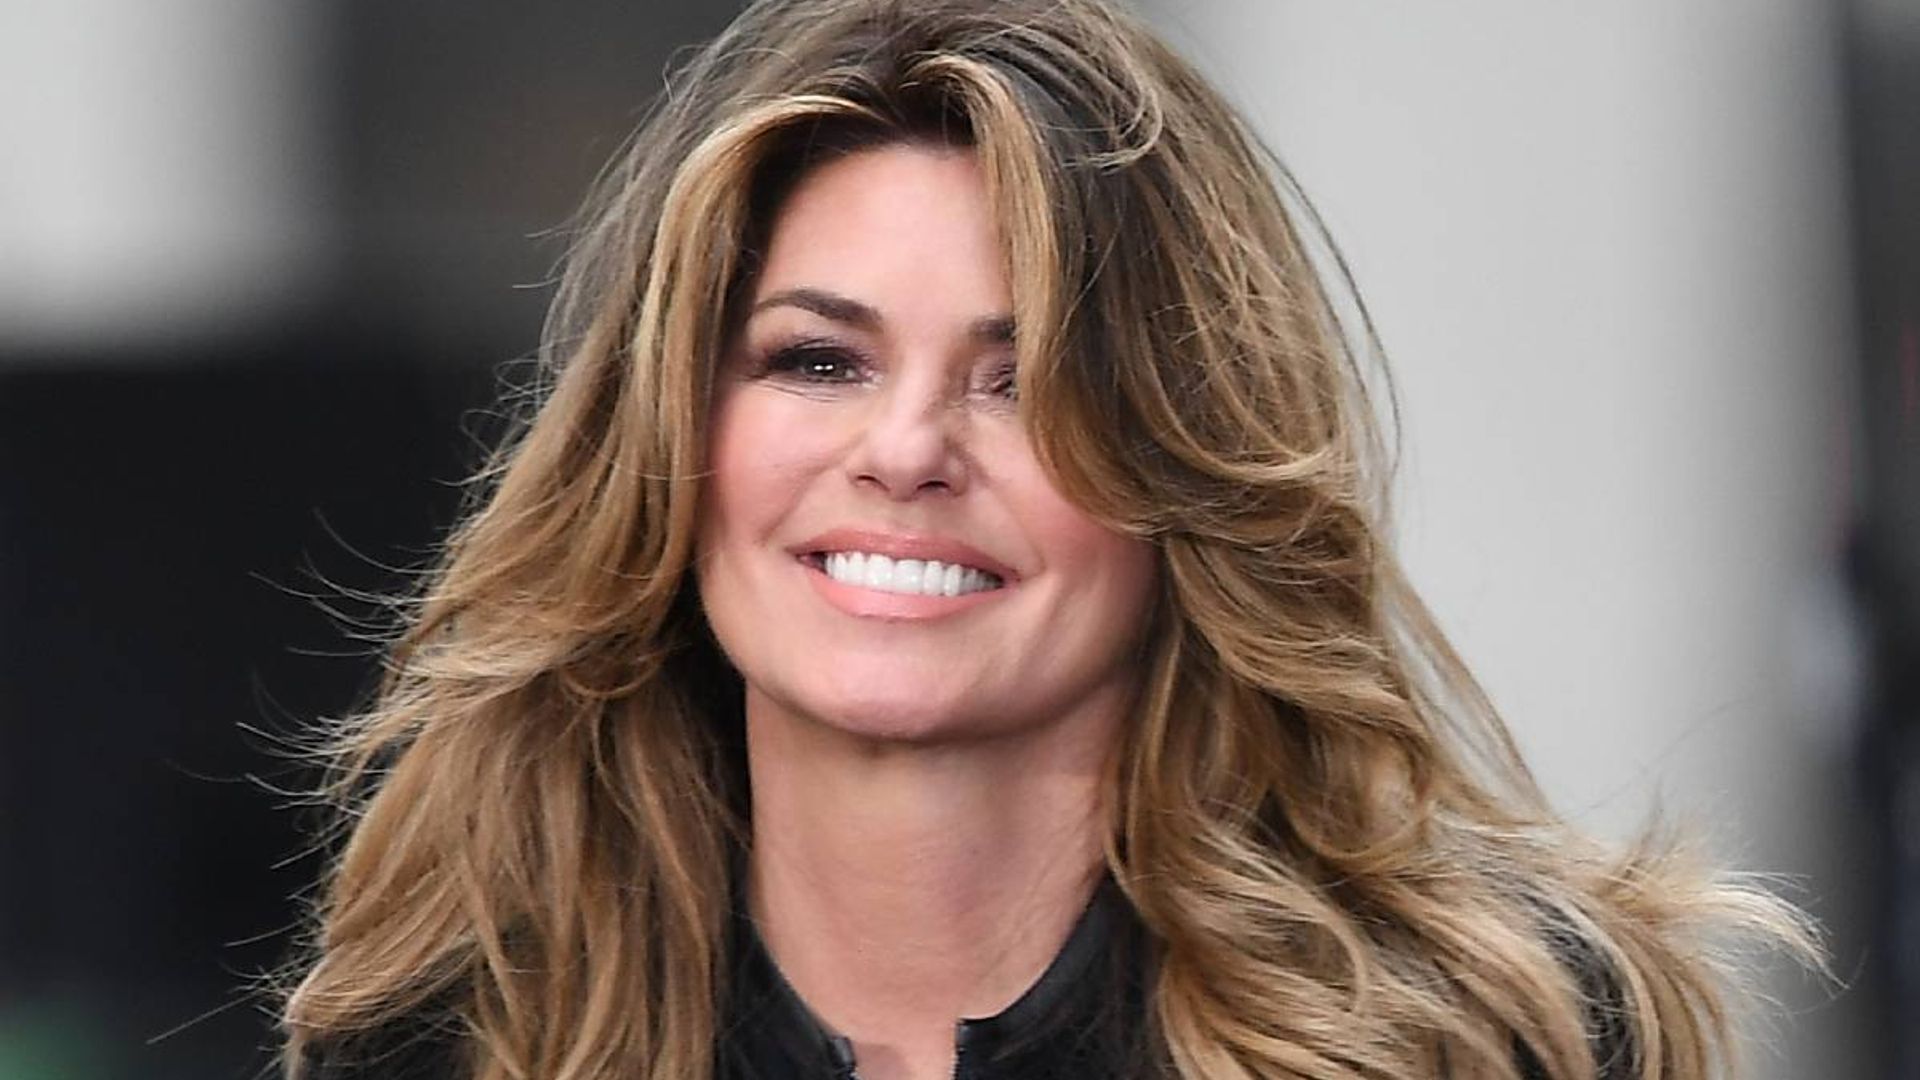 Shania Twain dances in the sun in all-denim look as she celebrates special anniversary